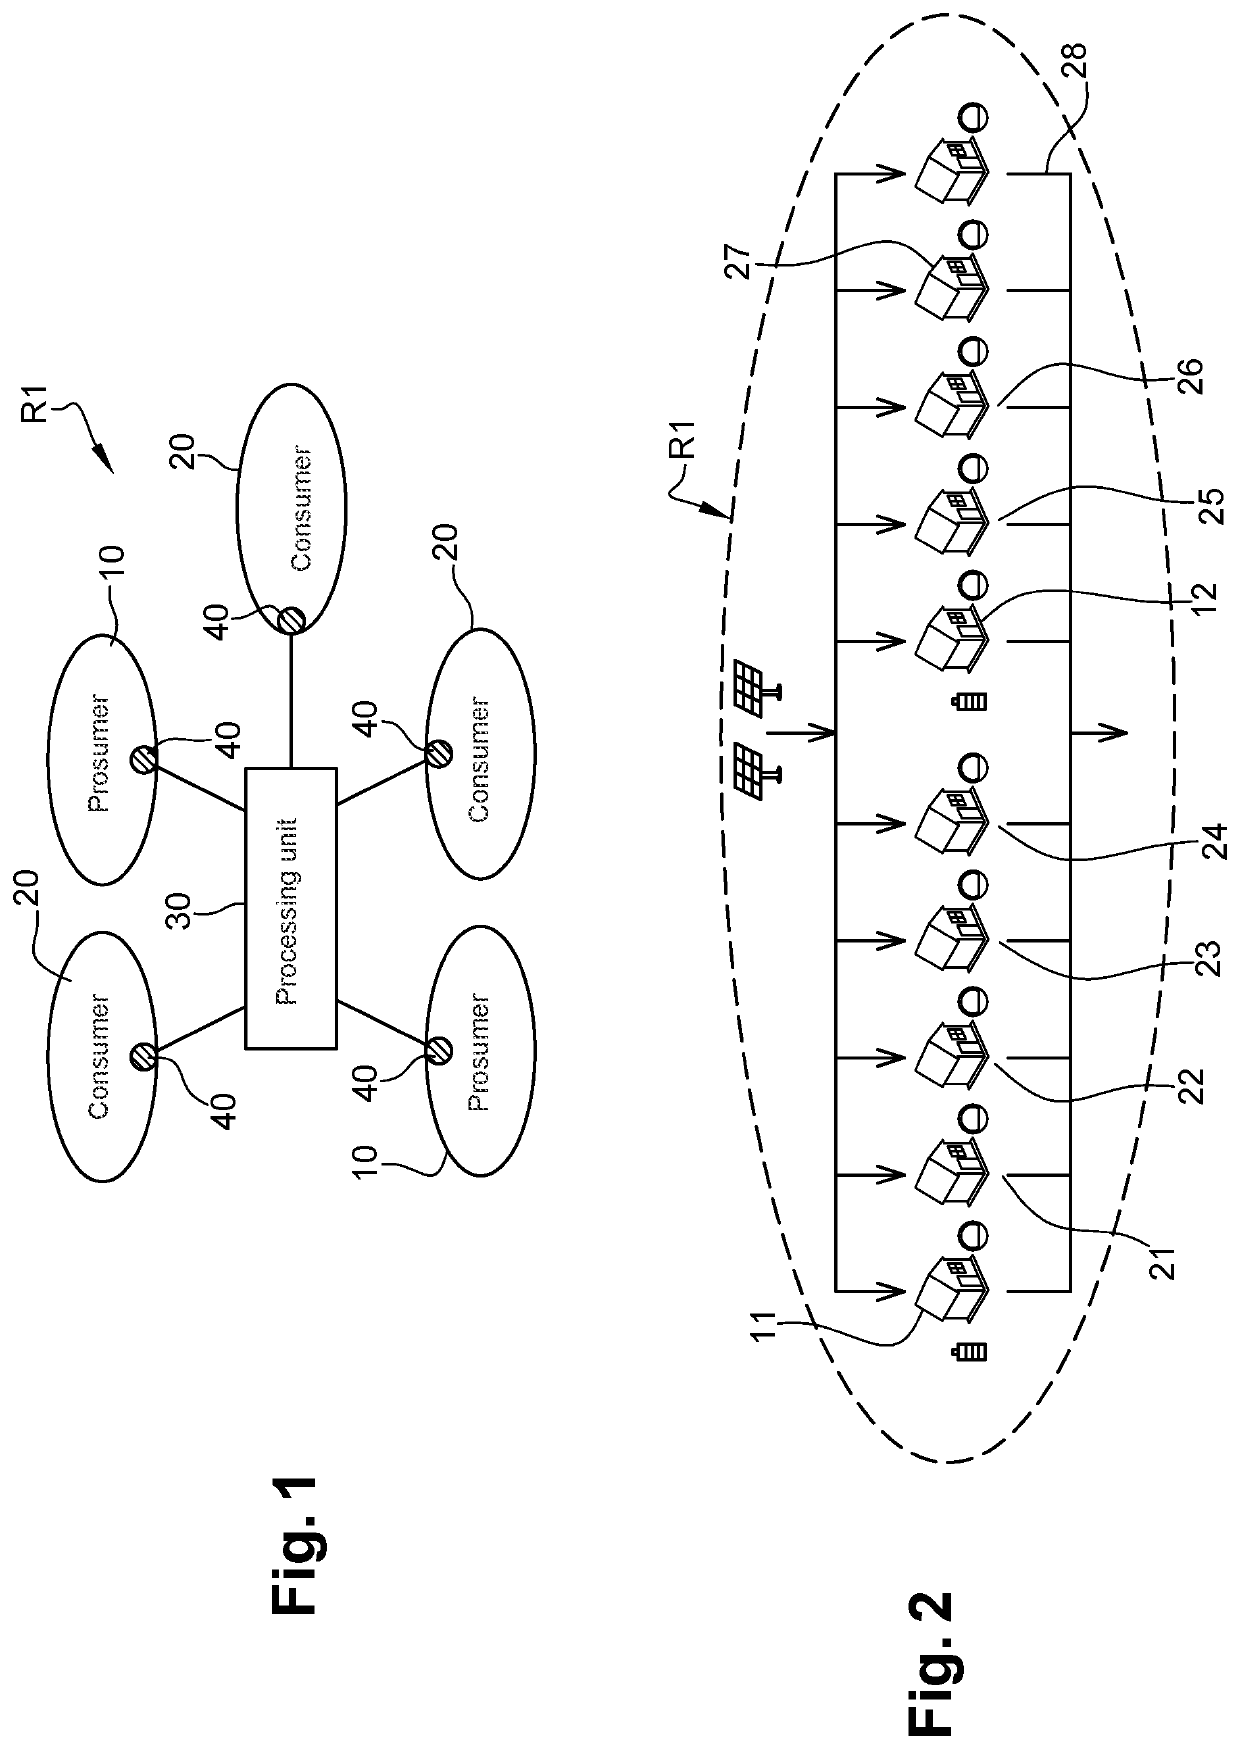 Method for the automatic management method of a flow of electrical energy